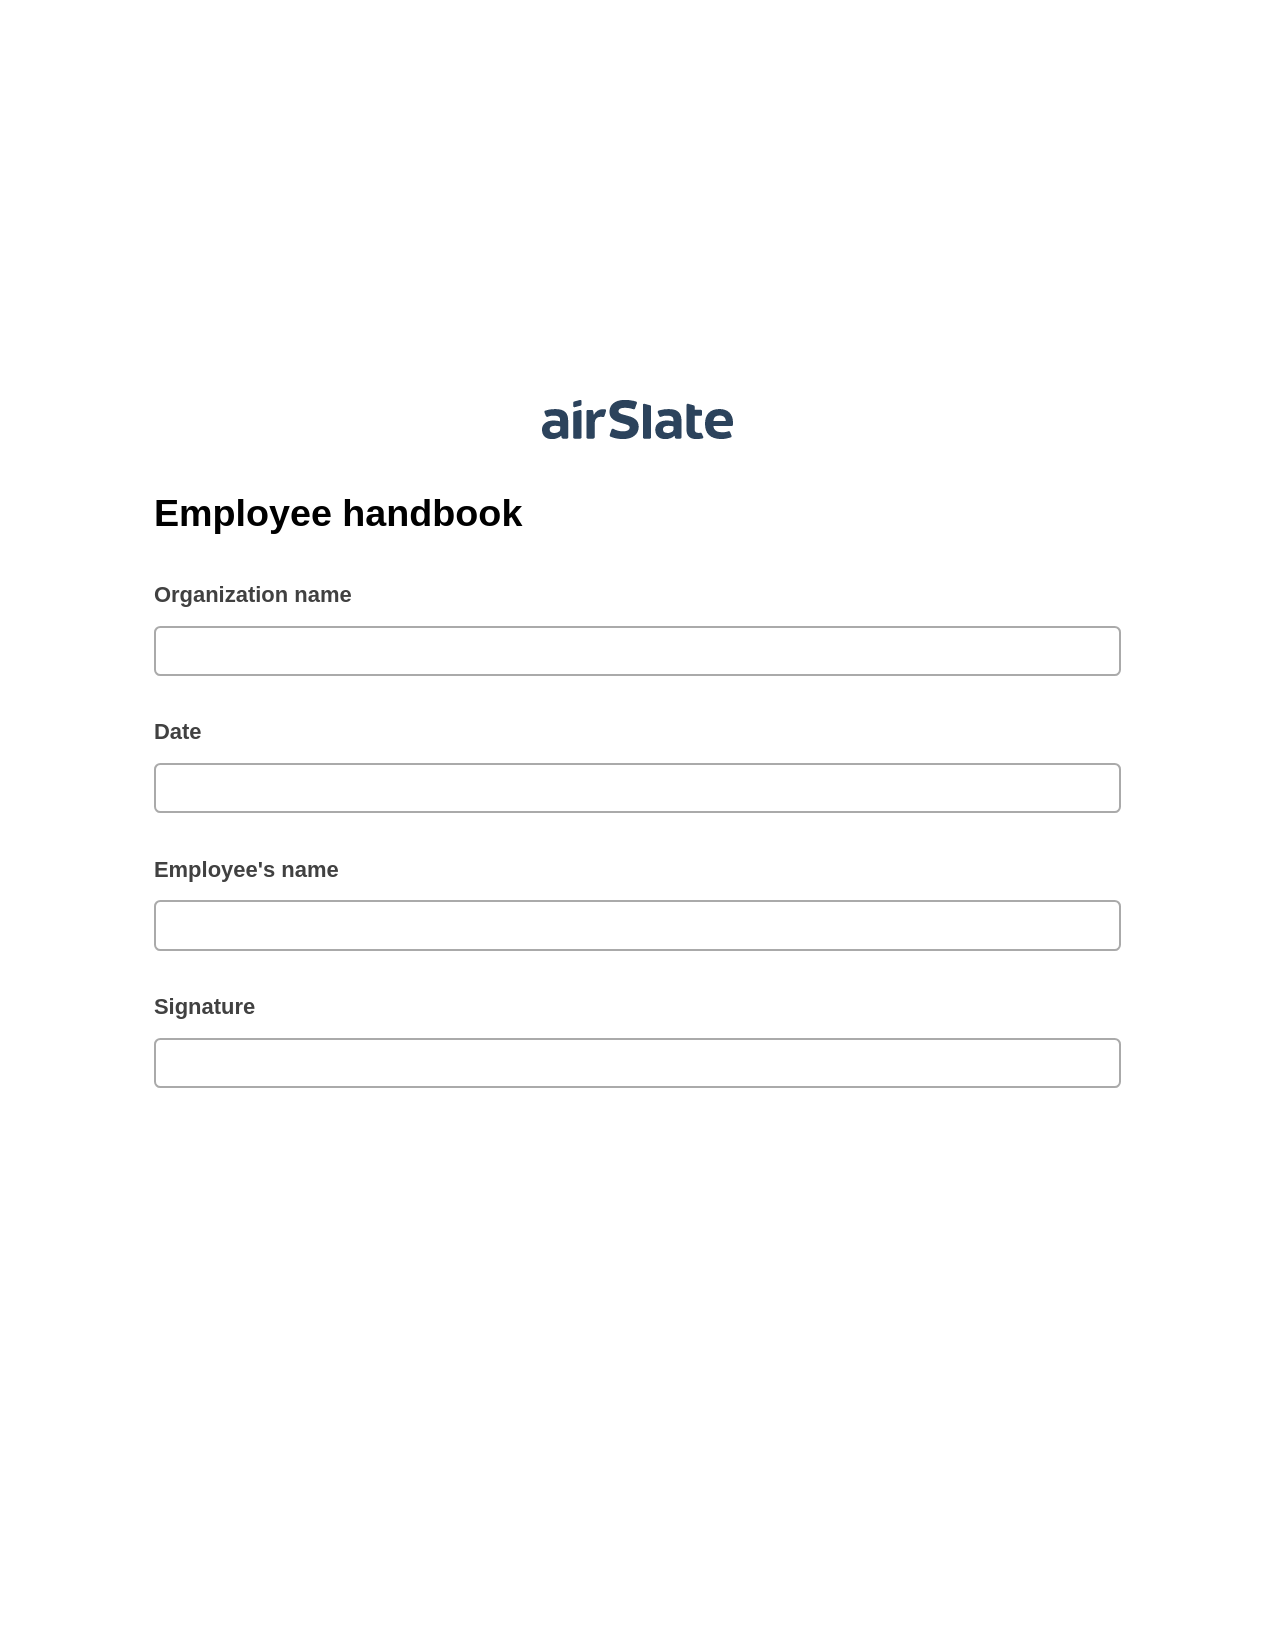 Employee handbook Pre-fill Document Bot, Add Tags to Slate Bot, Export to Smartsheet